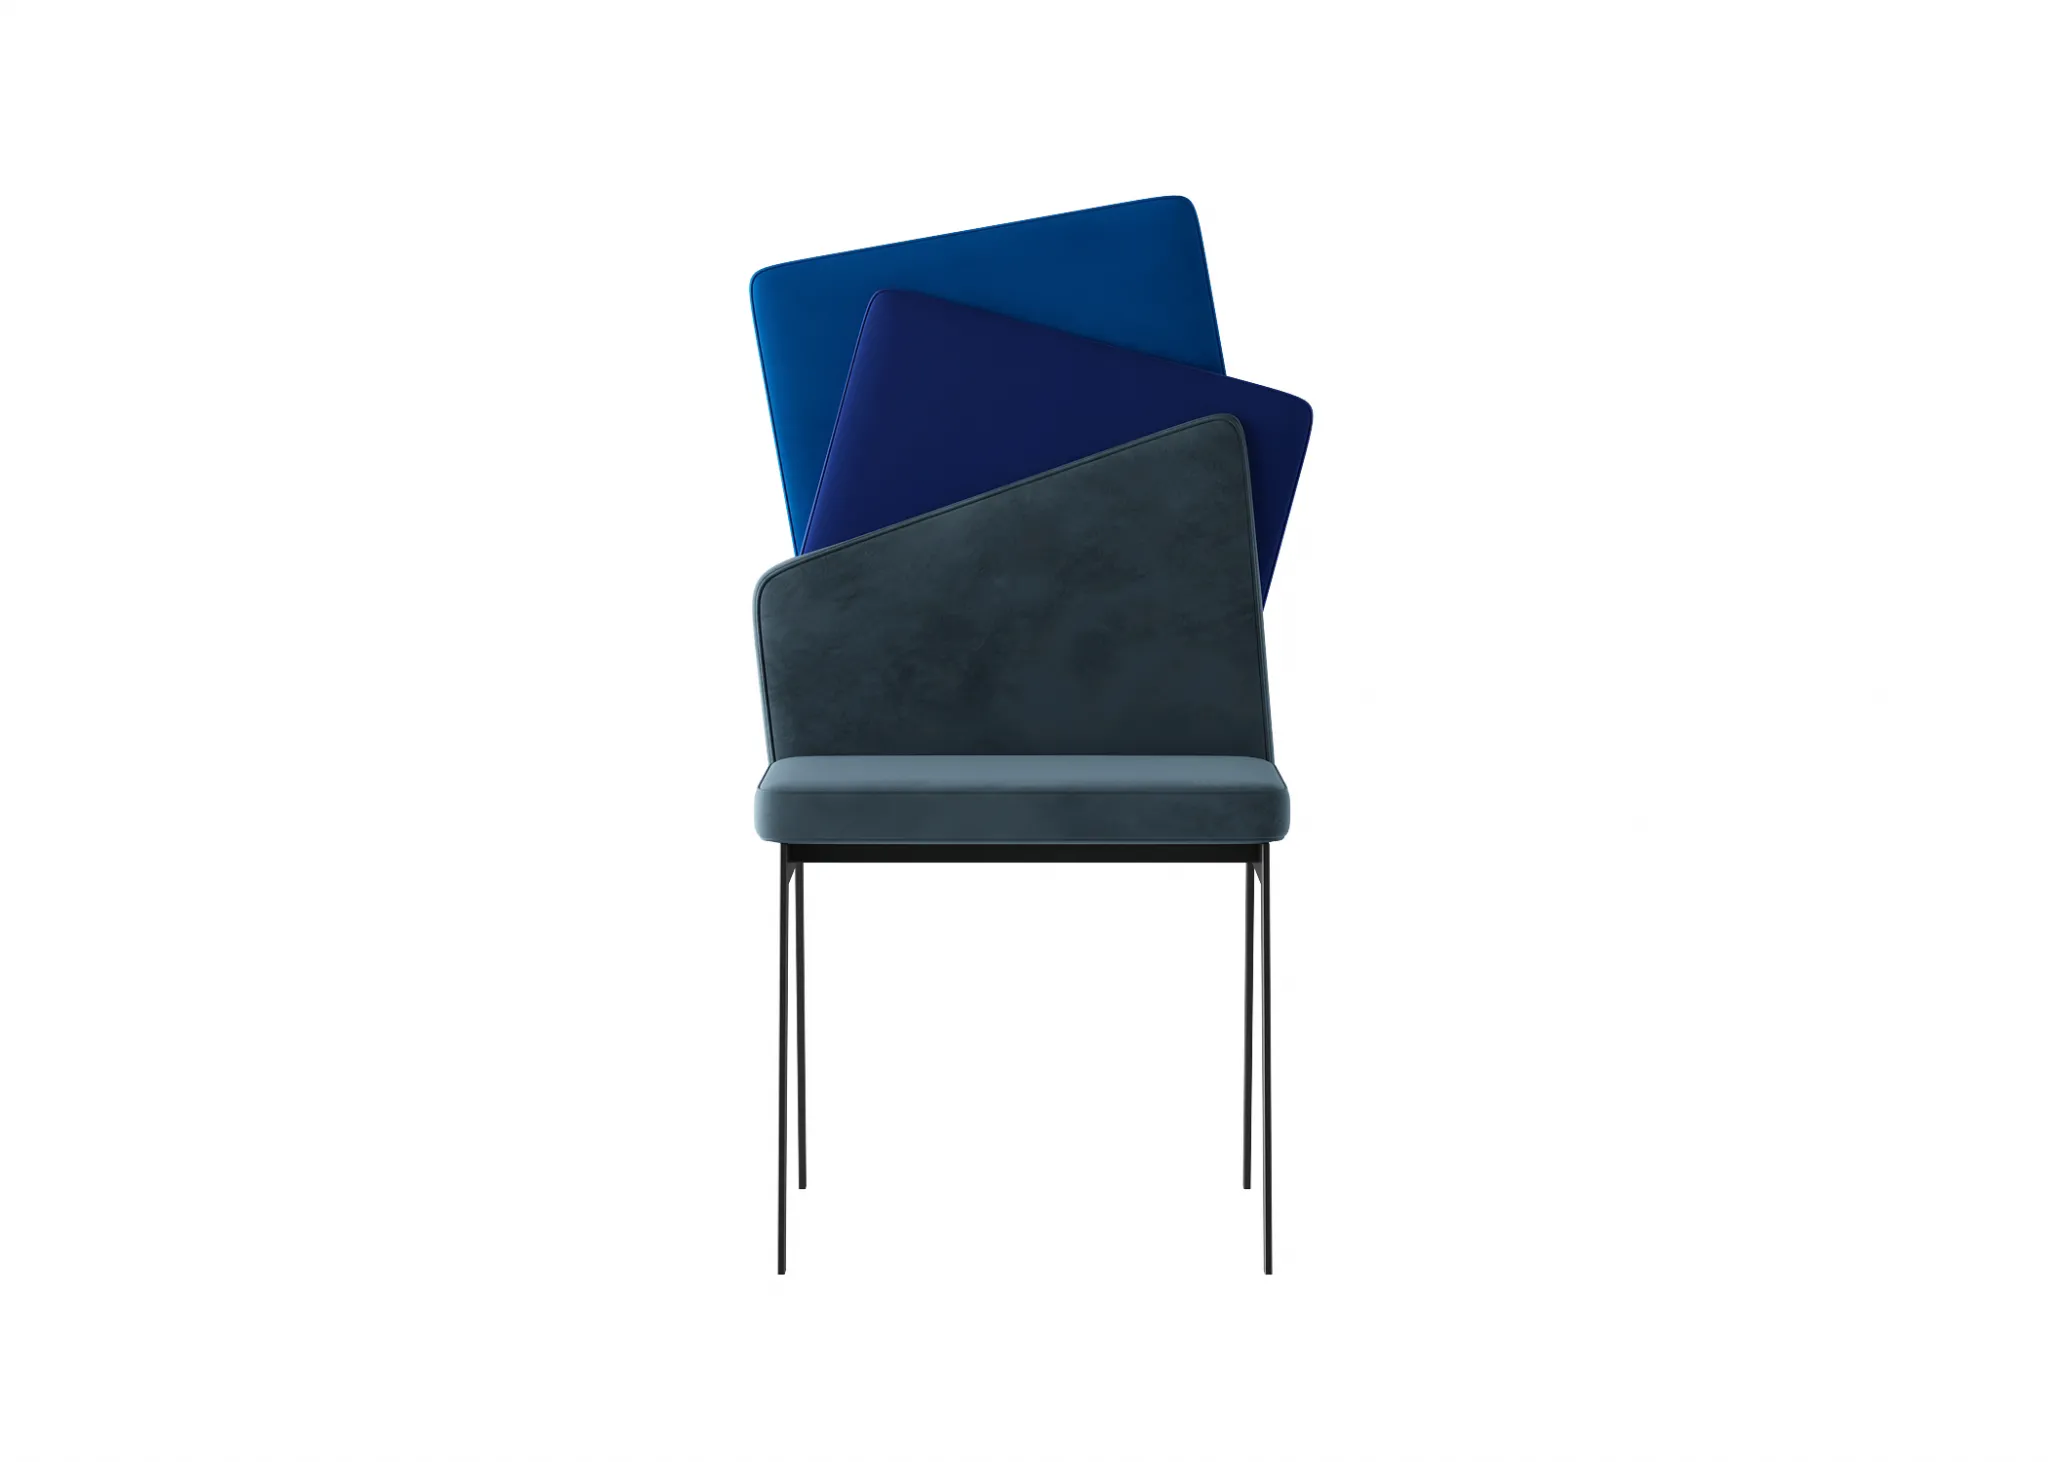 FURNITURE 3D MODELS – CHAIRS – 0385